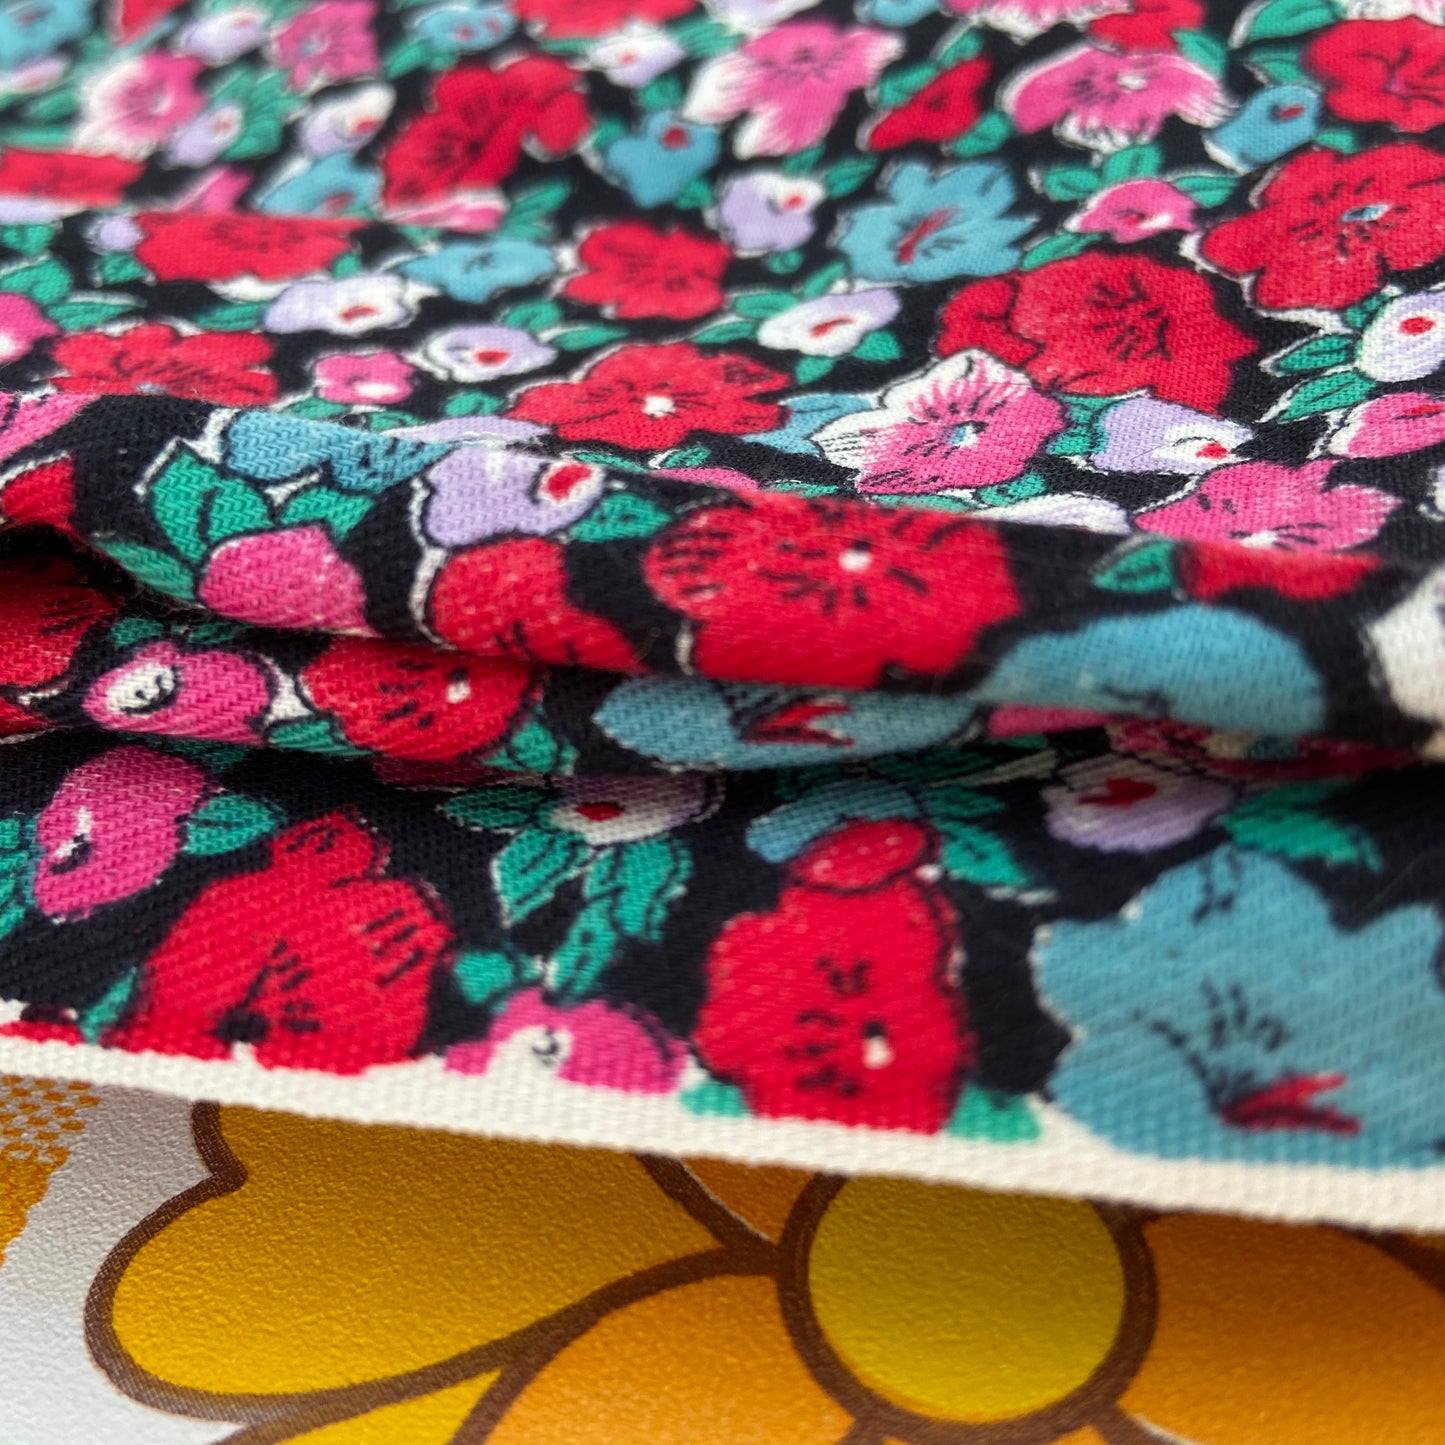 Vintage Floral FABRIC Bright COTTON Craft Sewing LOVELY